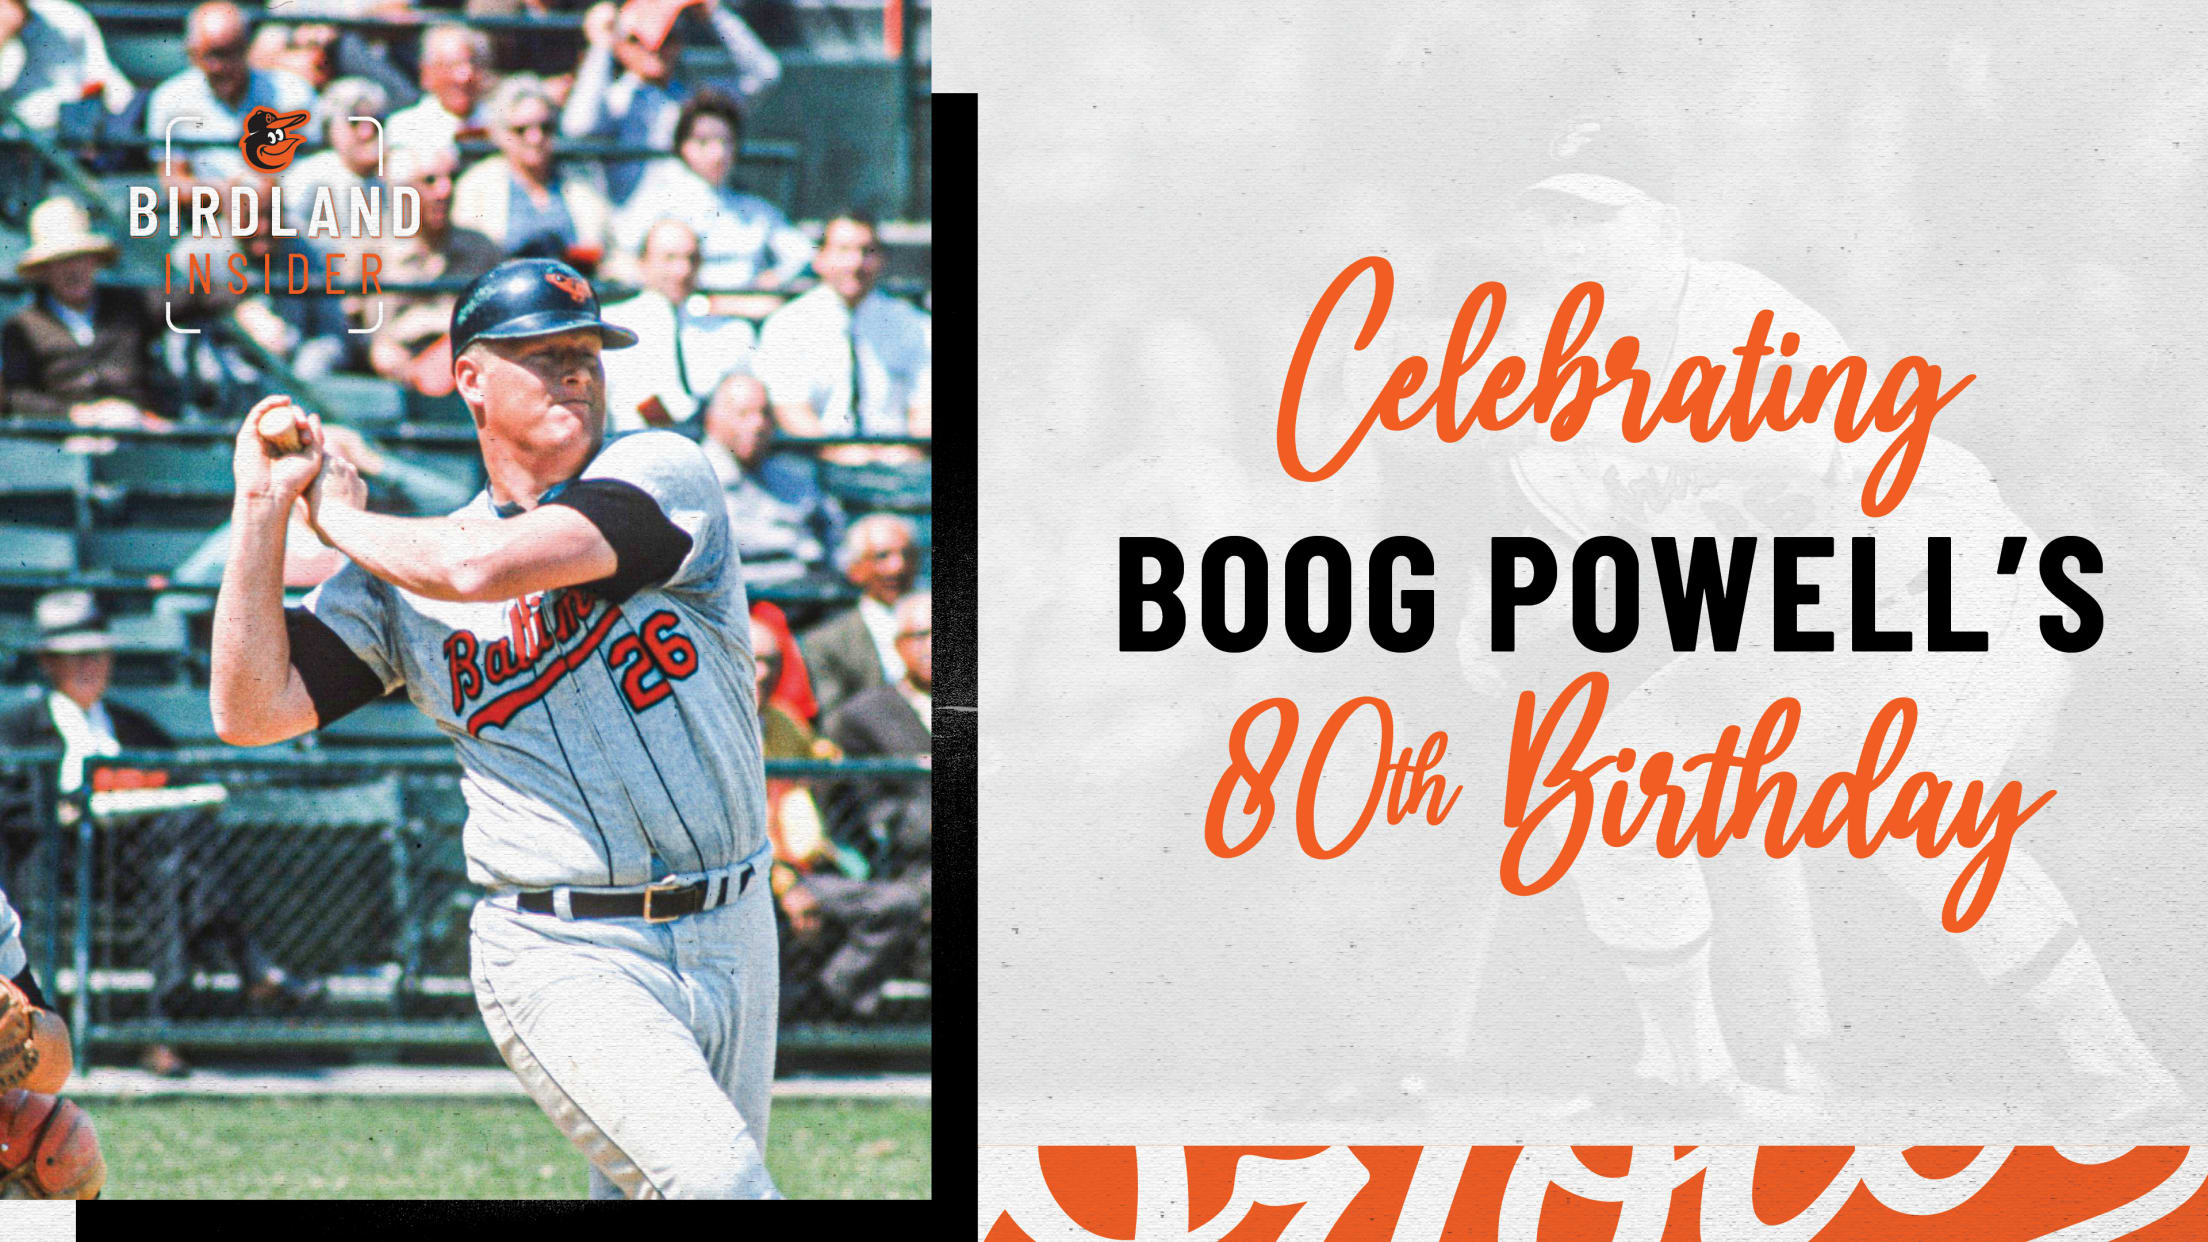 Boog Powell – The Baltimore Battery